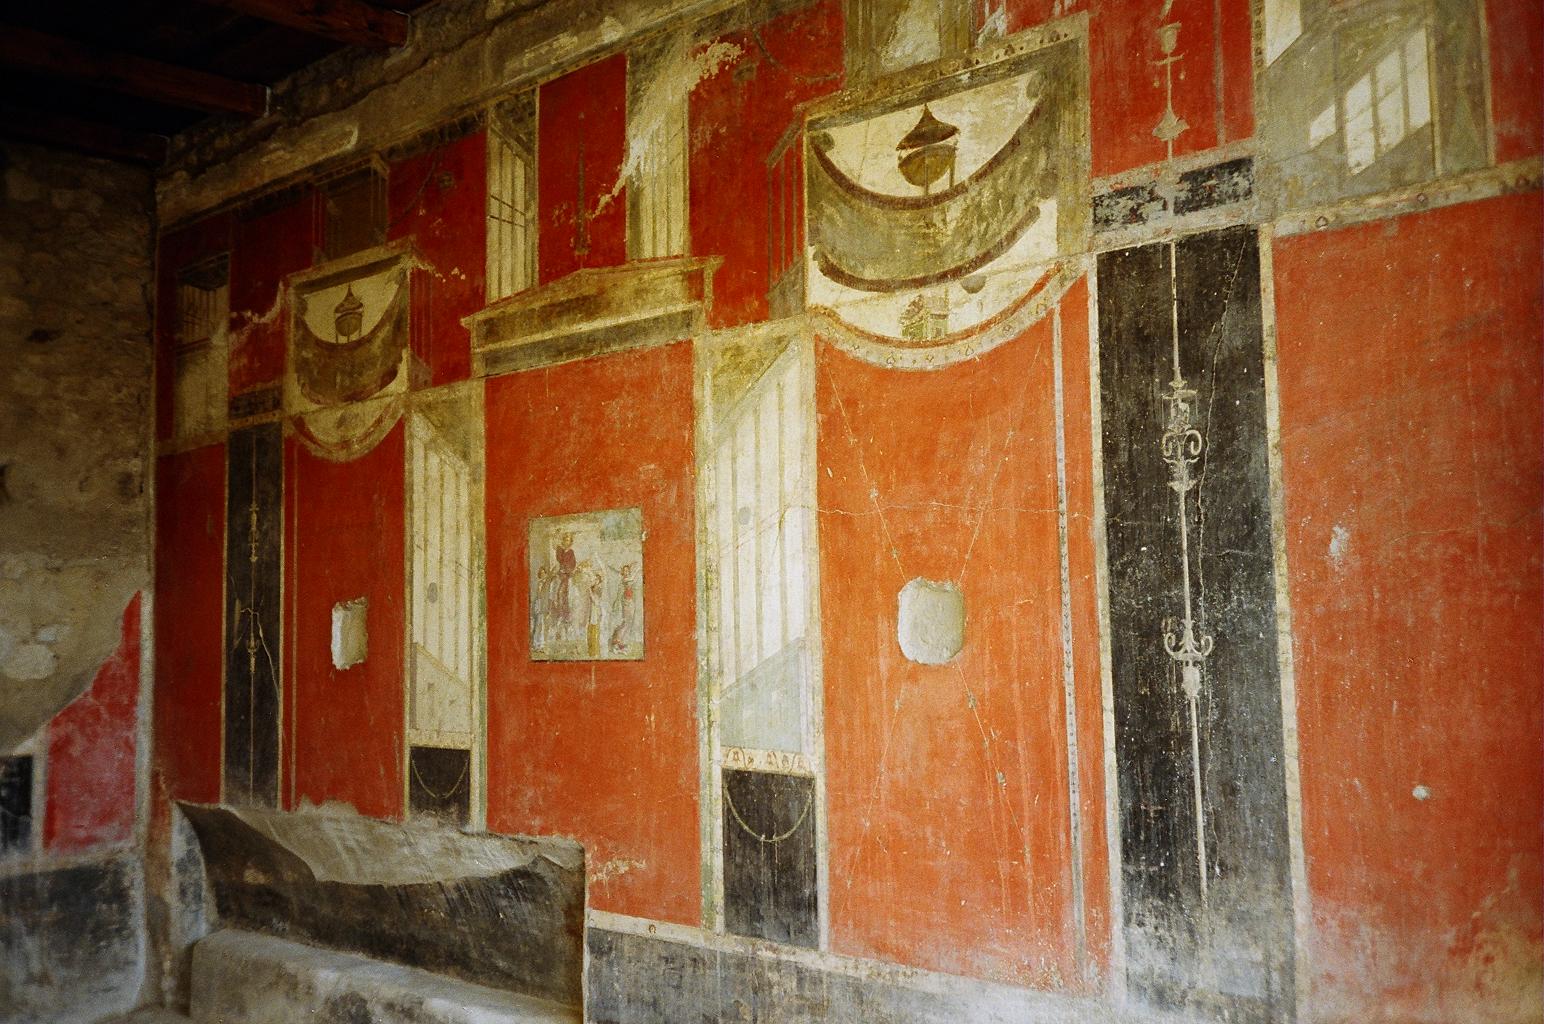 I.8.9 Pompeii, 1968. Room 7, east wall of triclinium. Photo by Stanley A. Jashemski.
Source: The Wilhelmina and Stanley A. Jashemski archive in the University of Maryland Library, Special Collections (See collection page) and made available under the Creative Commons Attribution-Non Commercial License v.4. See Licence and use details.
J68f0612
